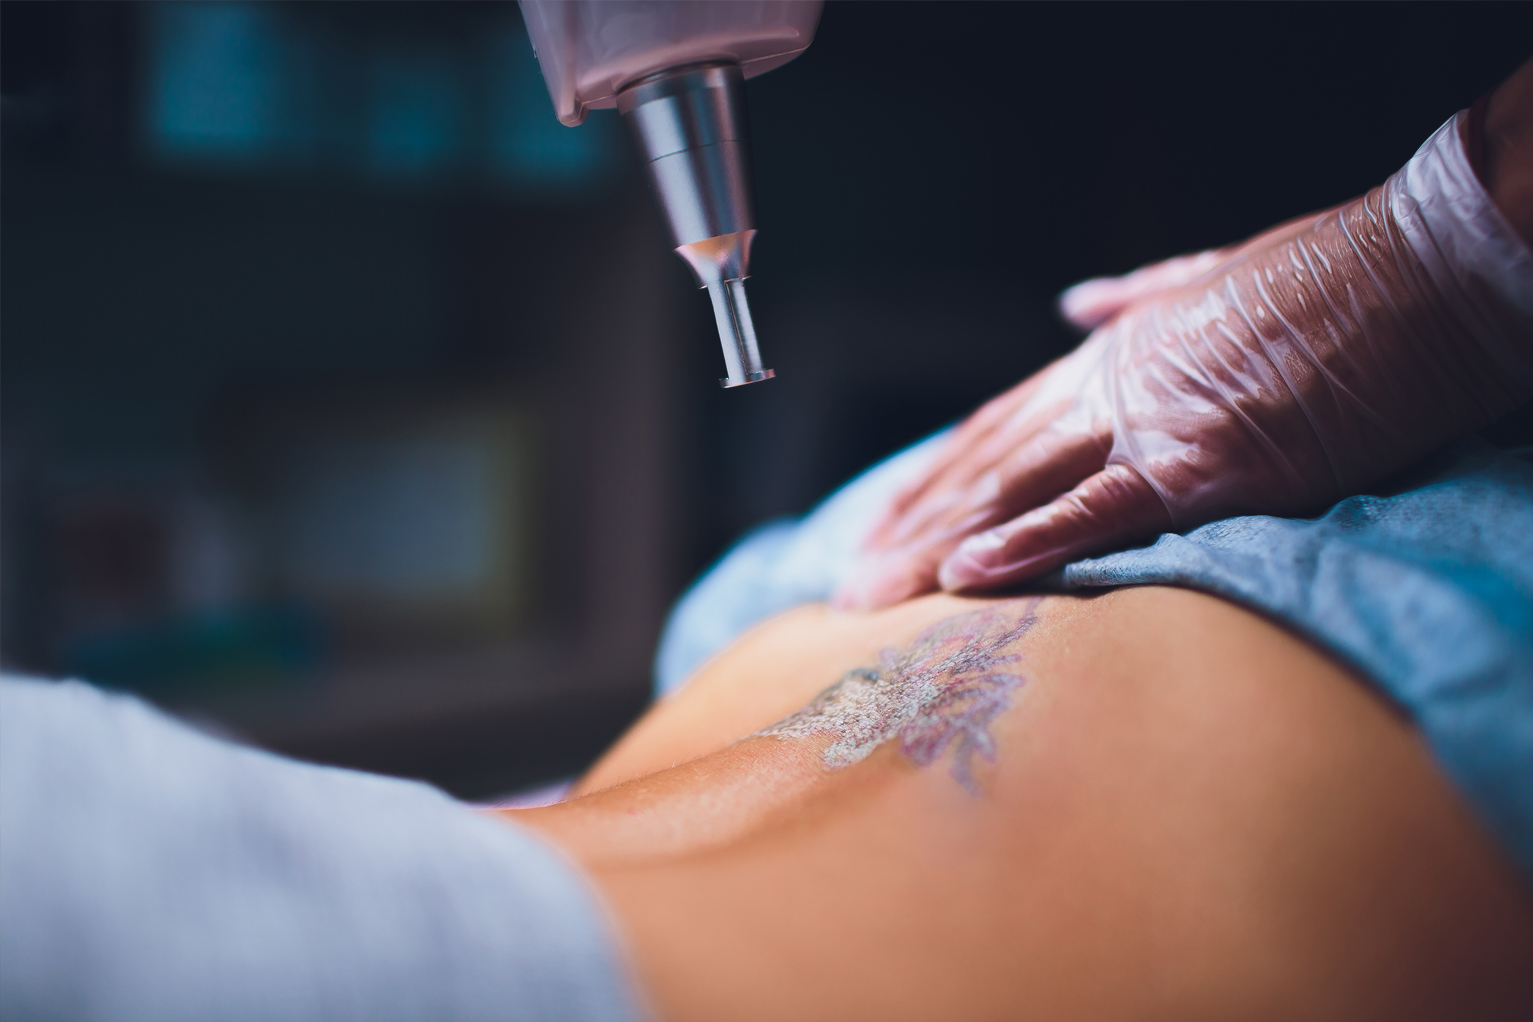 Proper Aftercare Instructions for Laser Tattoo Removal